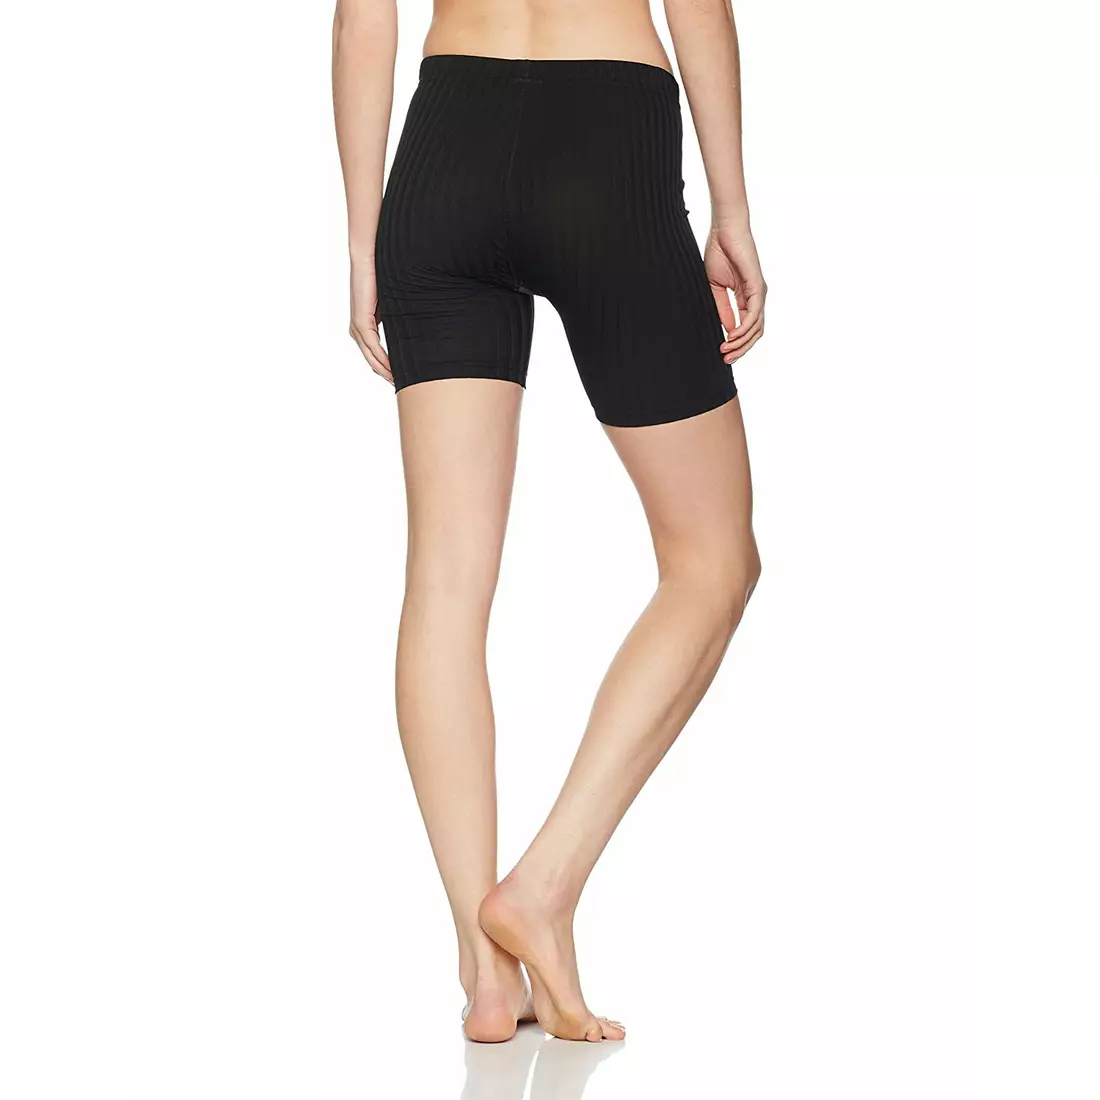 CRAFT BE ACTIVE EXTREME 2.0 WINDSTOPPER women's boxers 1904501-9999